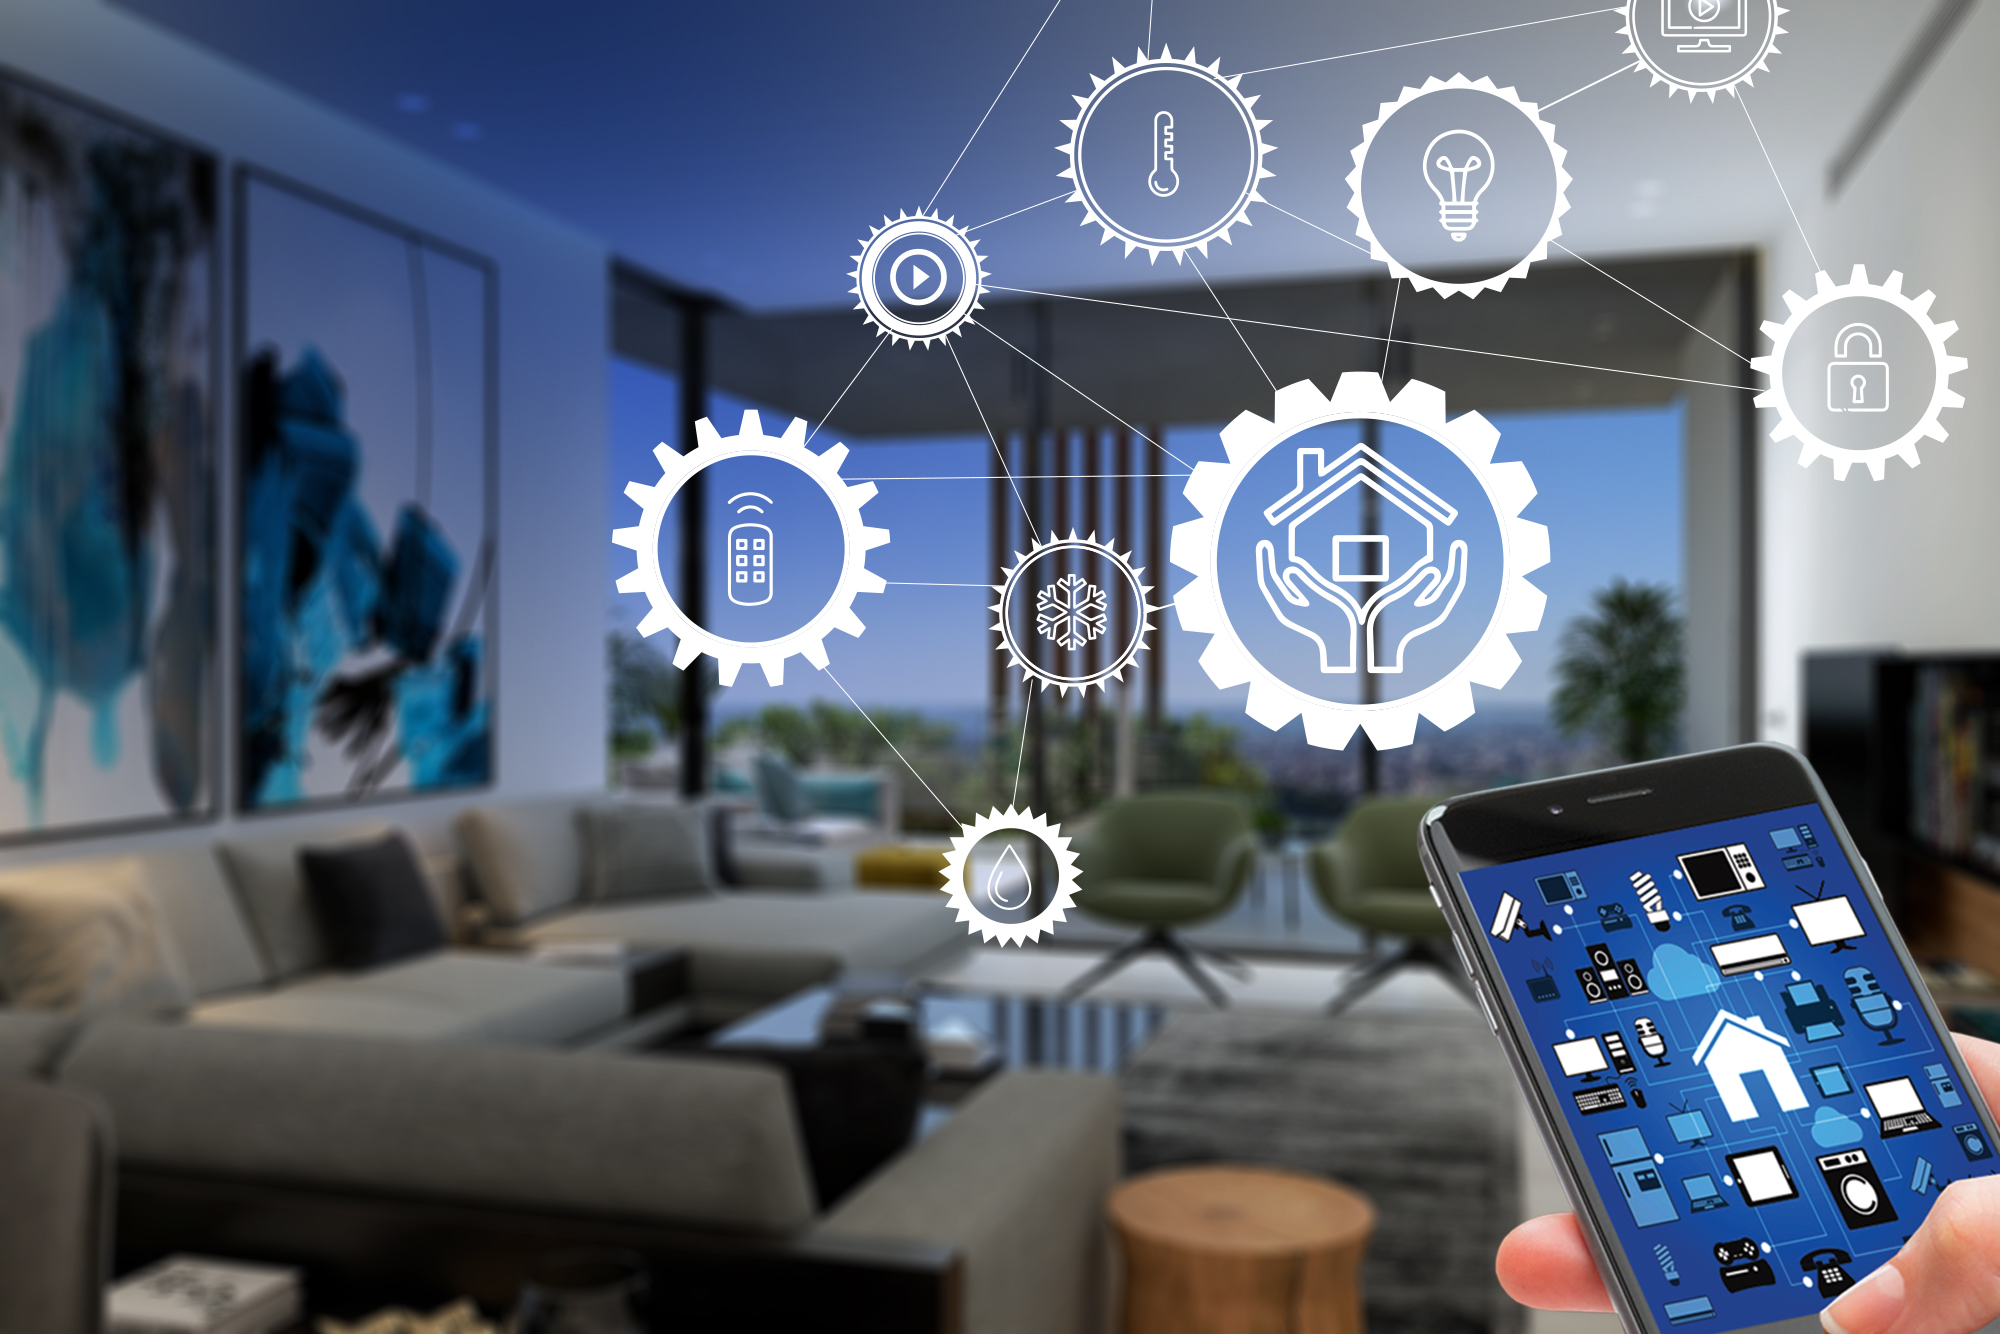 Smart Home Solutions